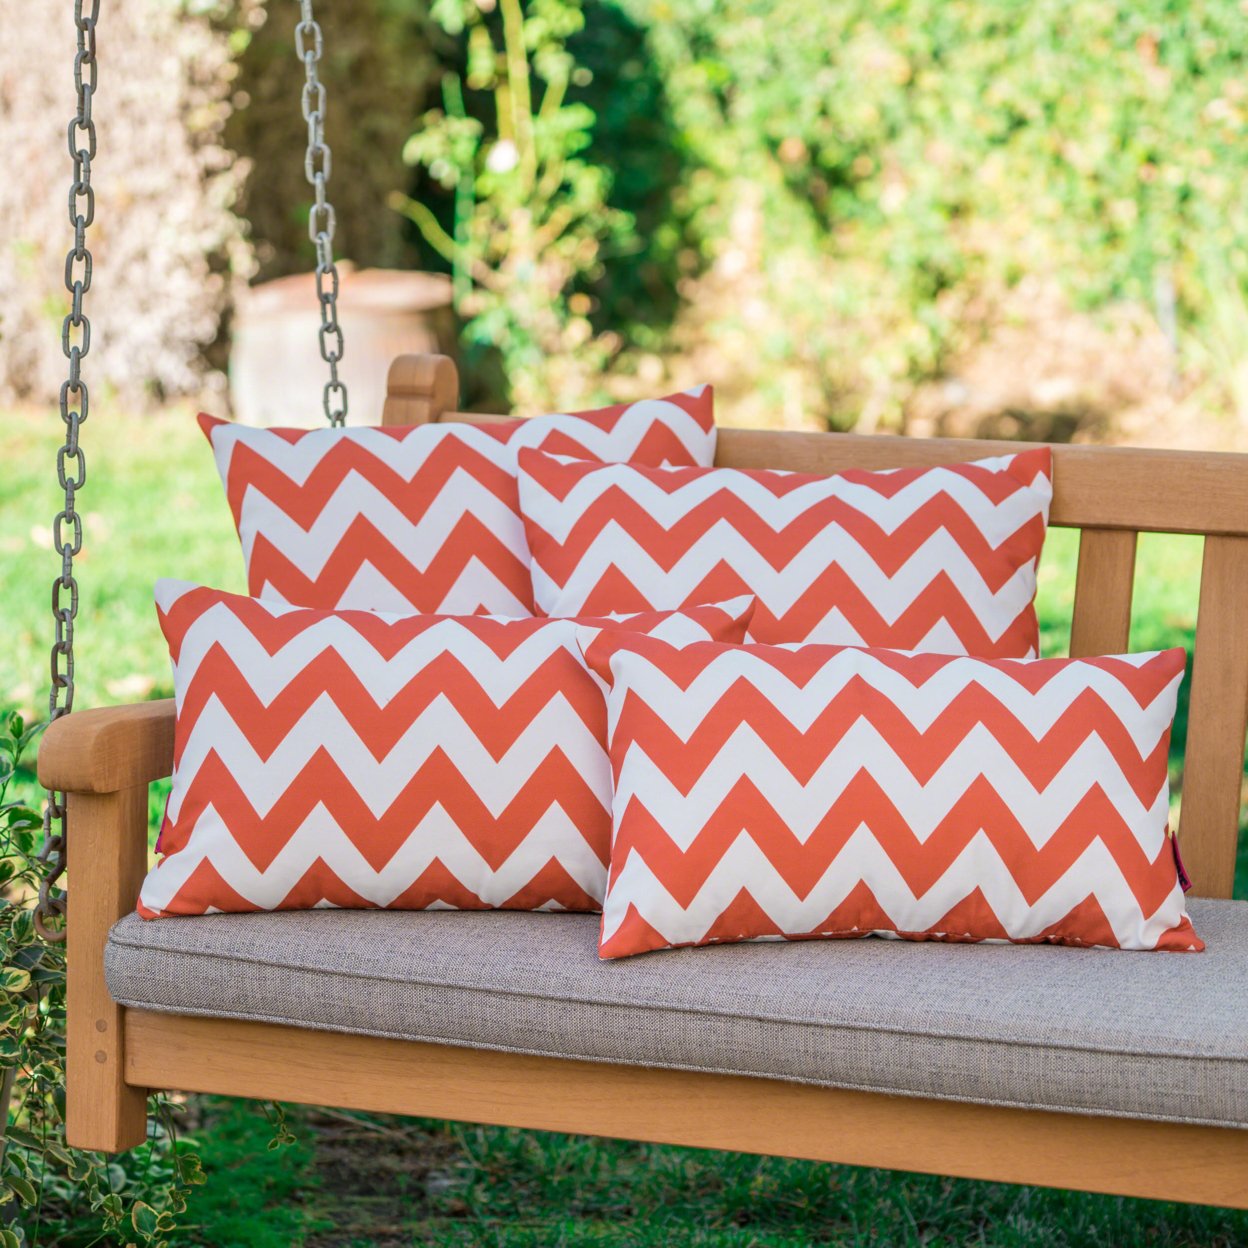 Embry Outdoor Water Resistant Square And Rectangular Pillows - Set Of 4 - Orange/White